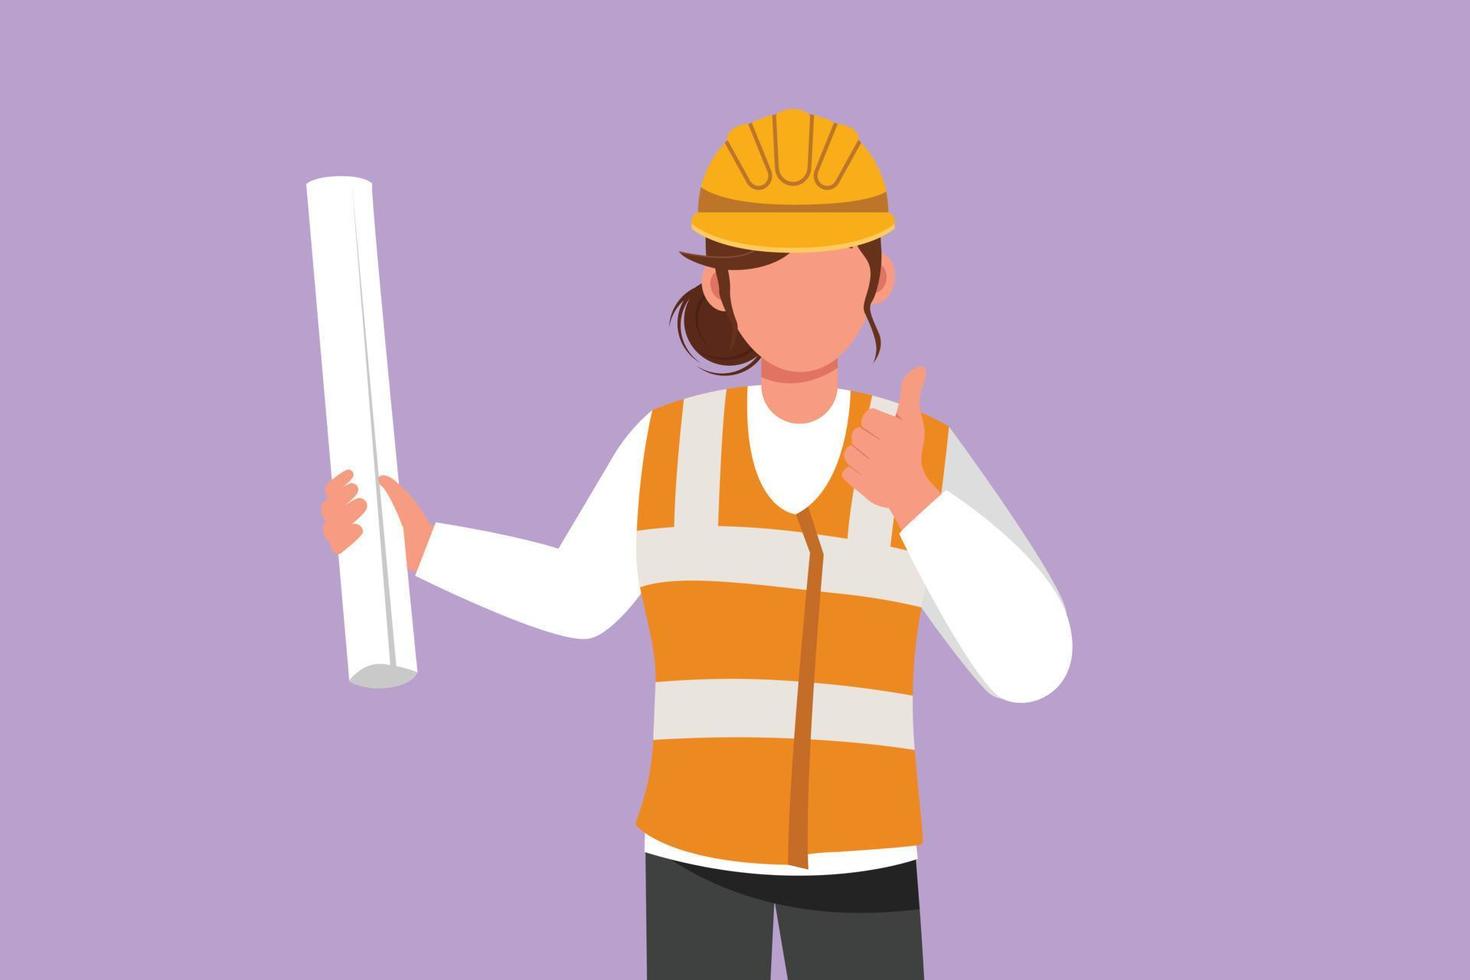 Character flat drawing female architect wearing vest and helmet with thumbs up gesture, carrying blueprint paper for the building work plan. Builder on work at site. Cartoon design vector illustration